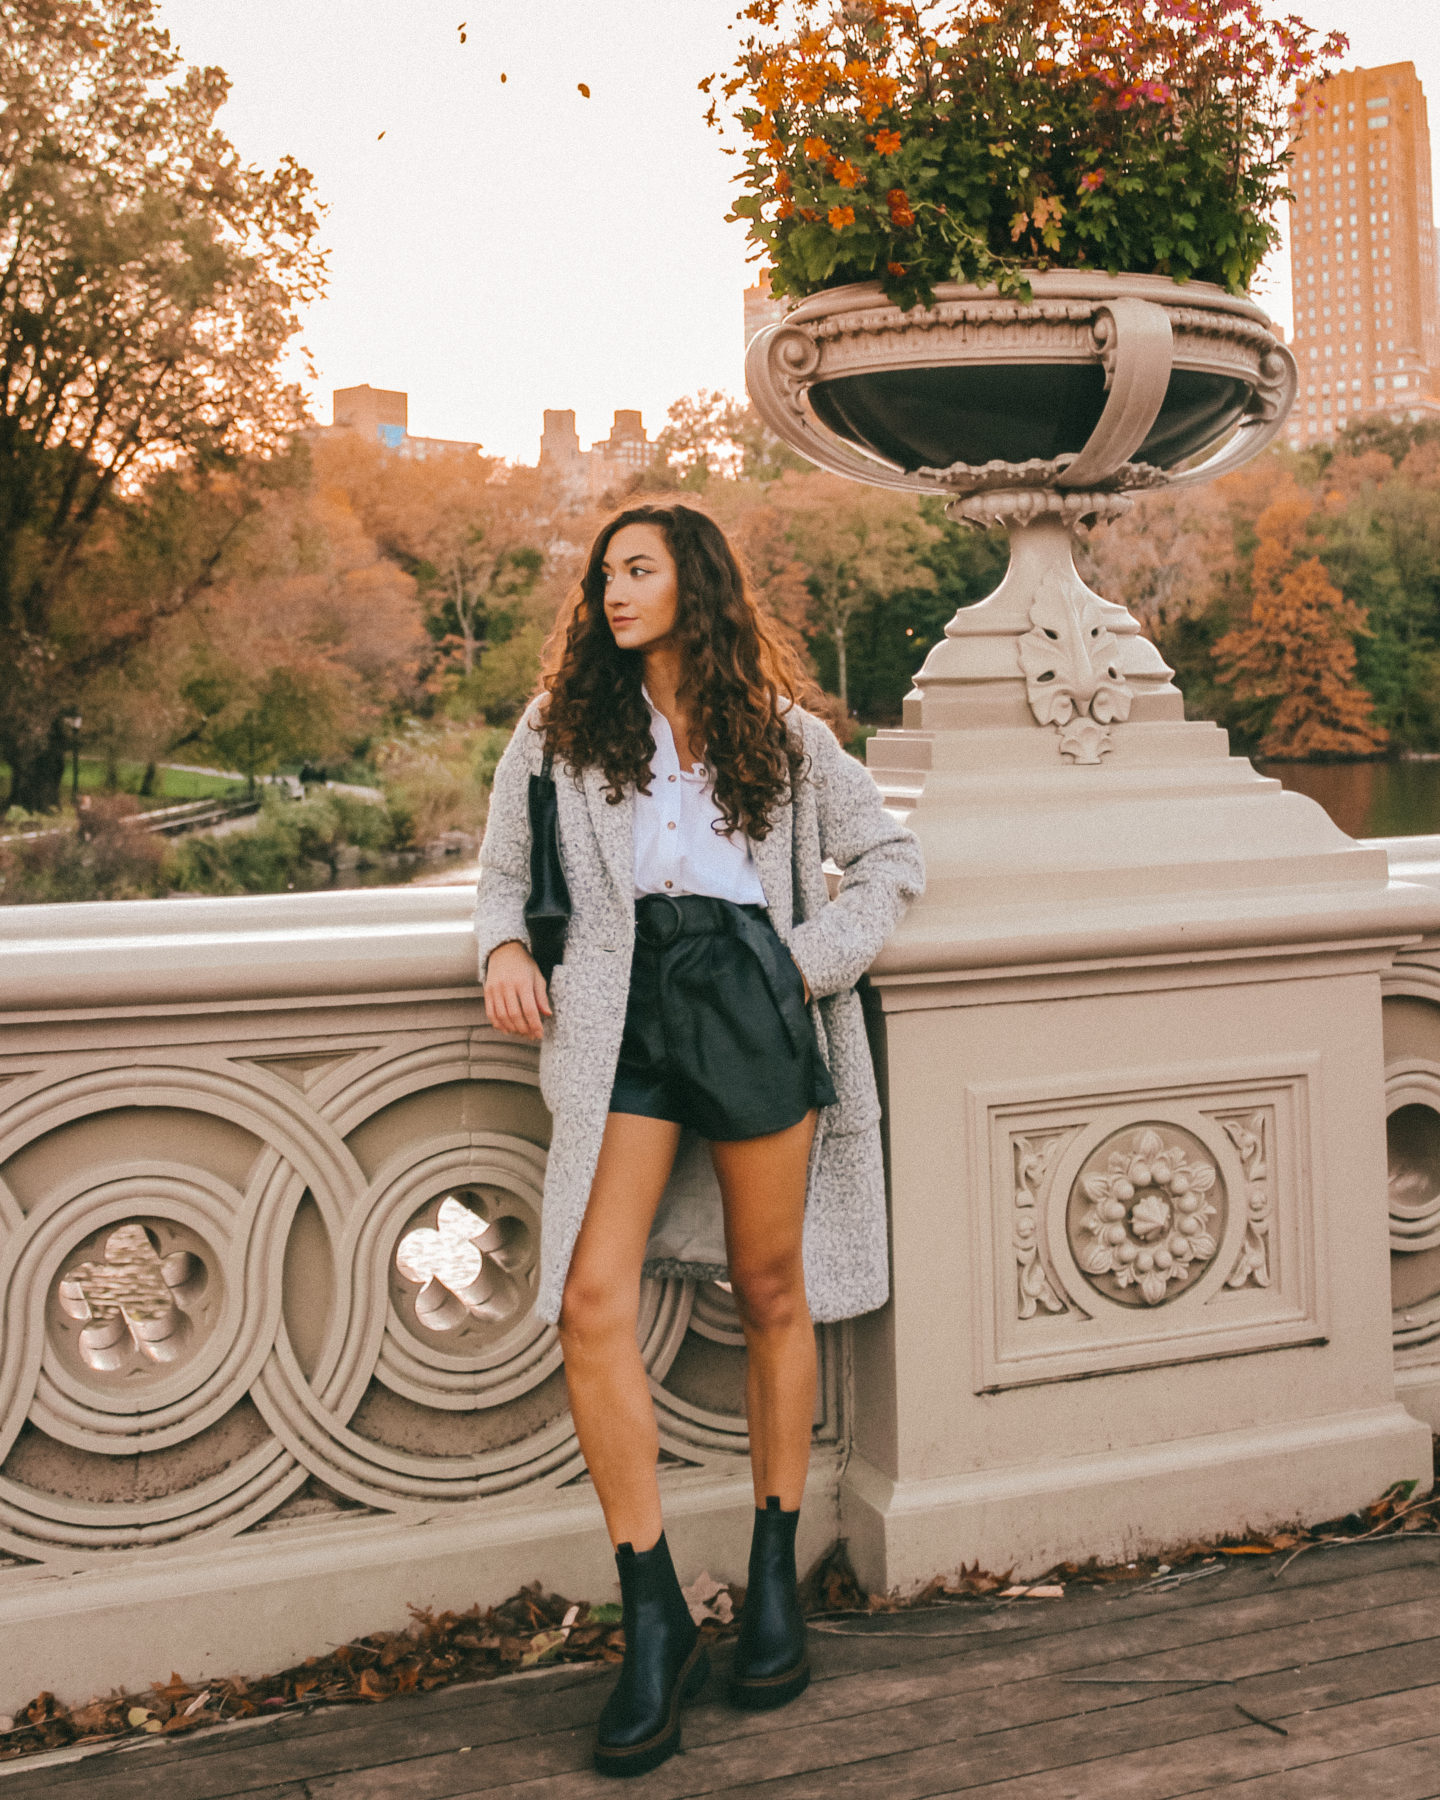 Street style fall outfits central park ashion womens outfit ideas boots soho nyc blogger style trendy